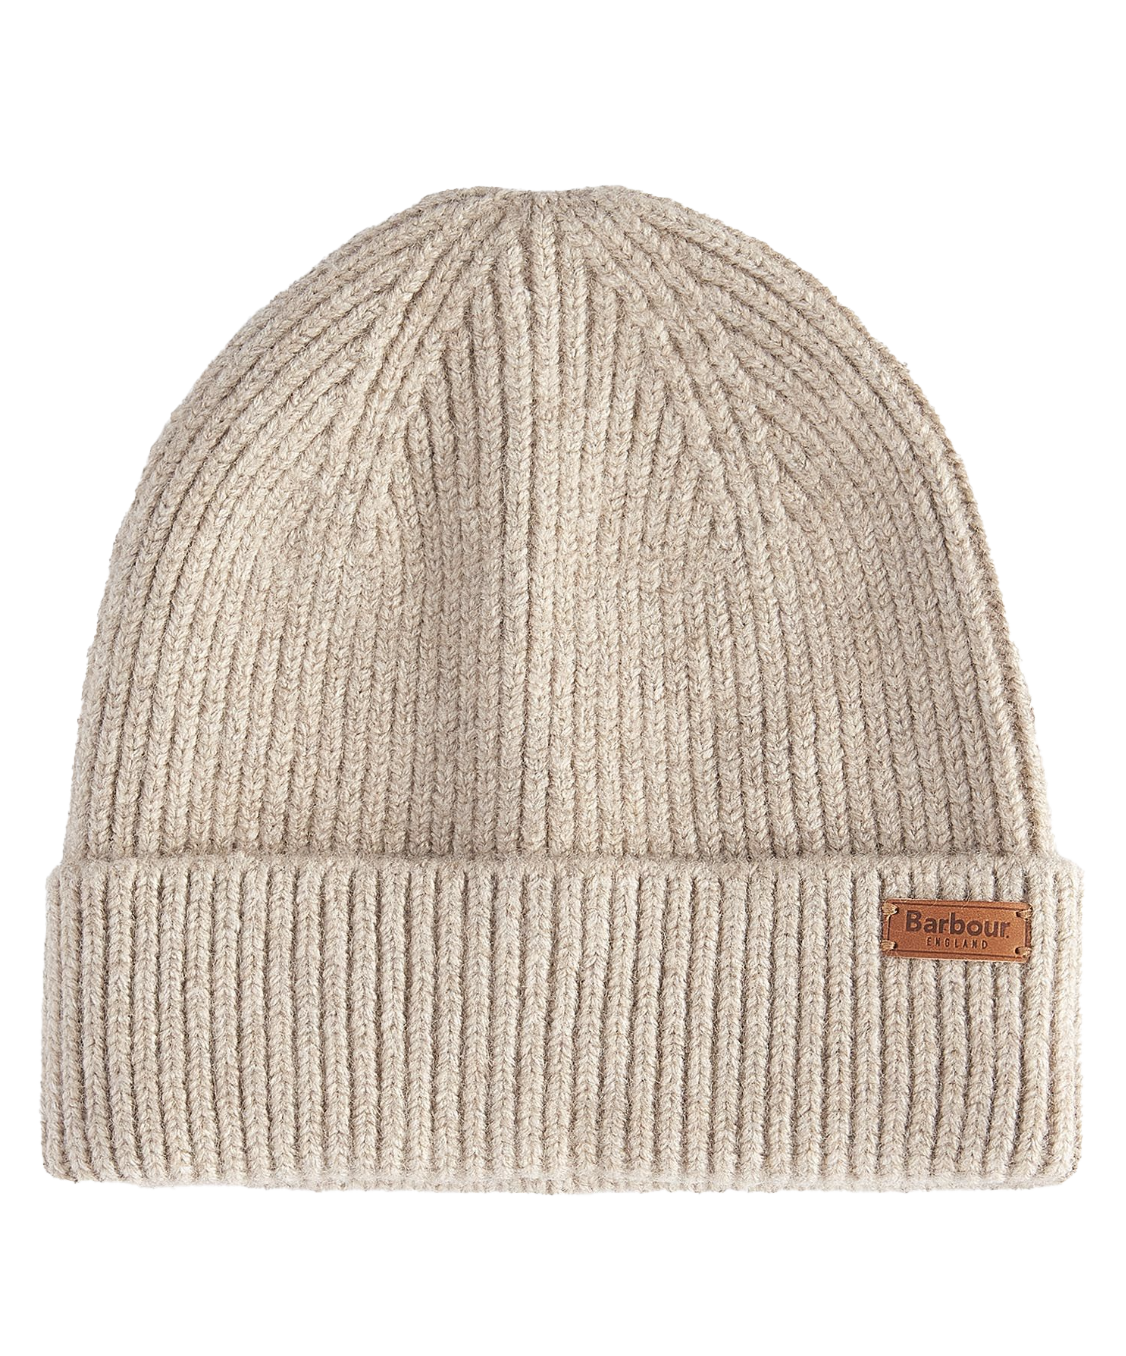 Ws Barbour Pendle Beanie